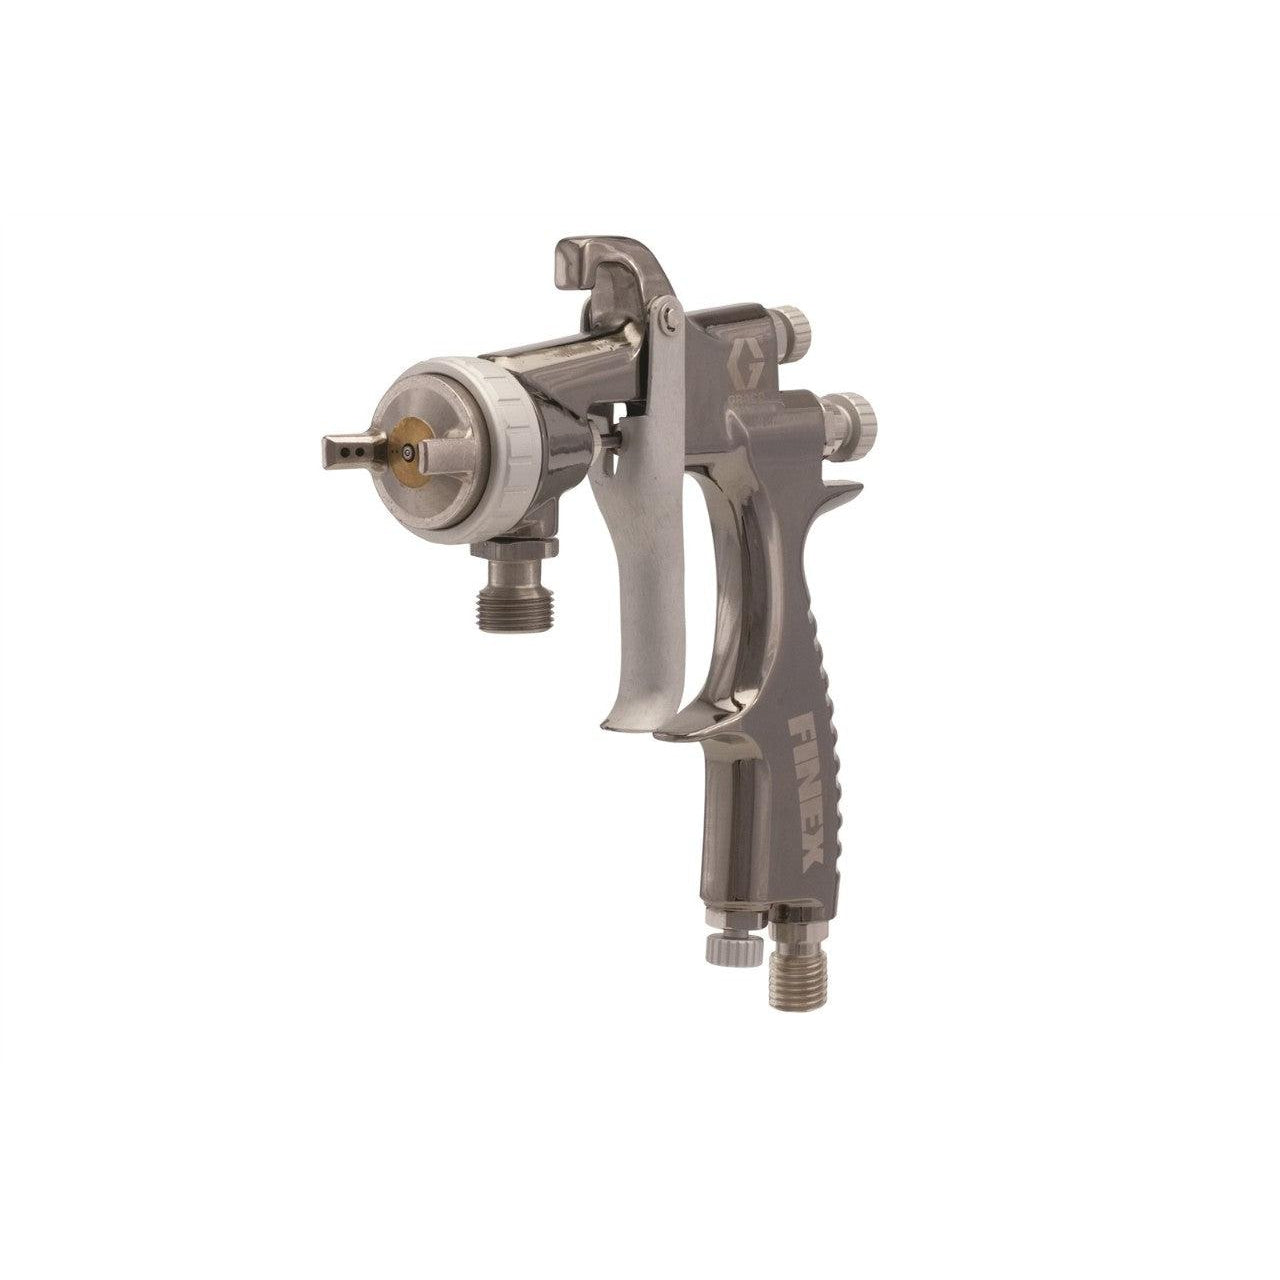 Finex Air Spray Pressure Feed Gun, conventional, 0.071 in (1.8 mm) needle/ nozzle size